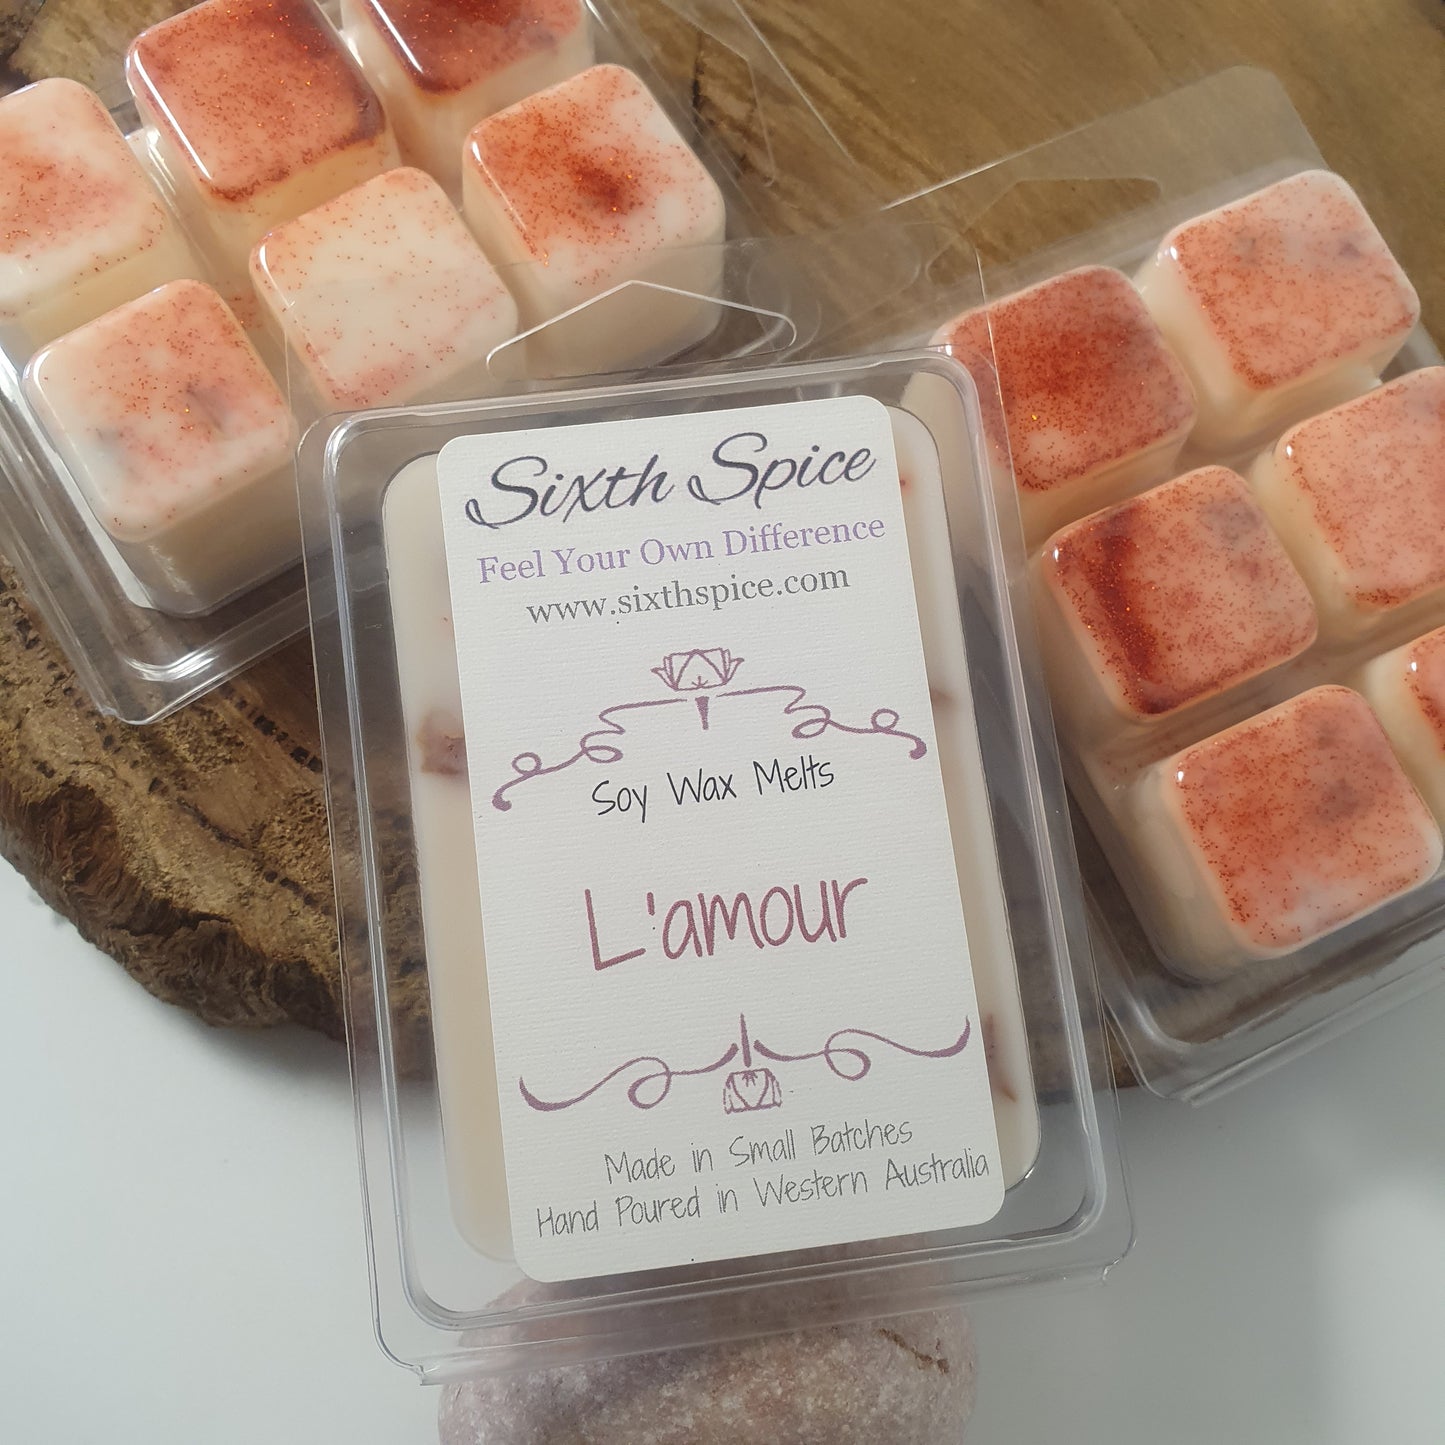 L'amore Scented Soy Wax Melts